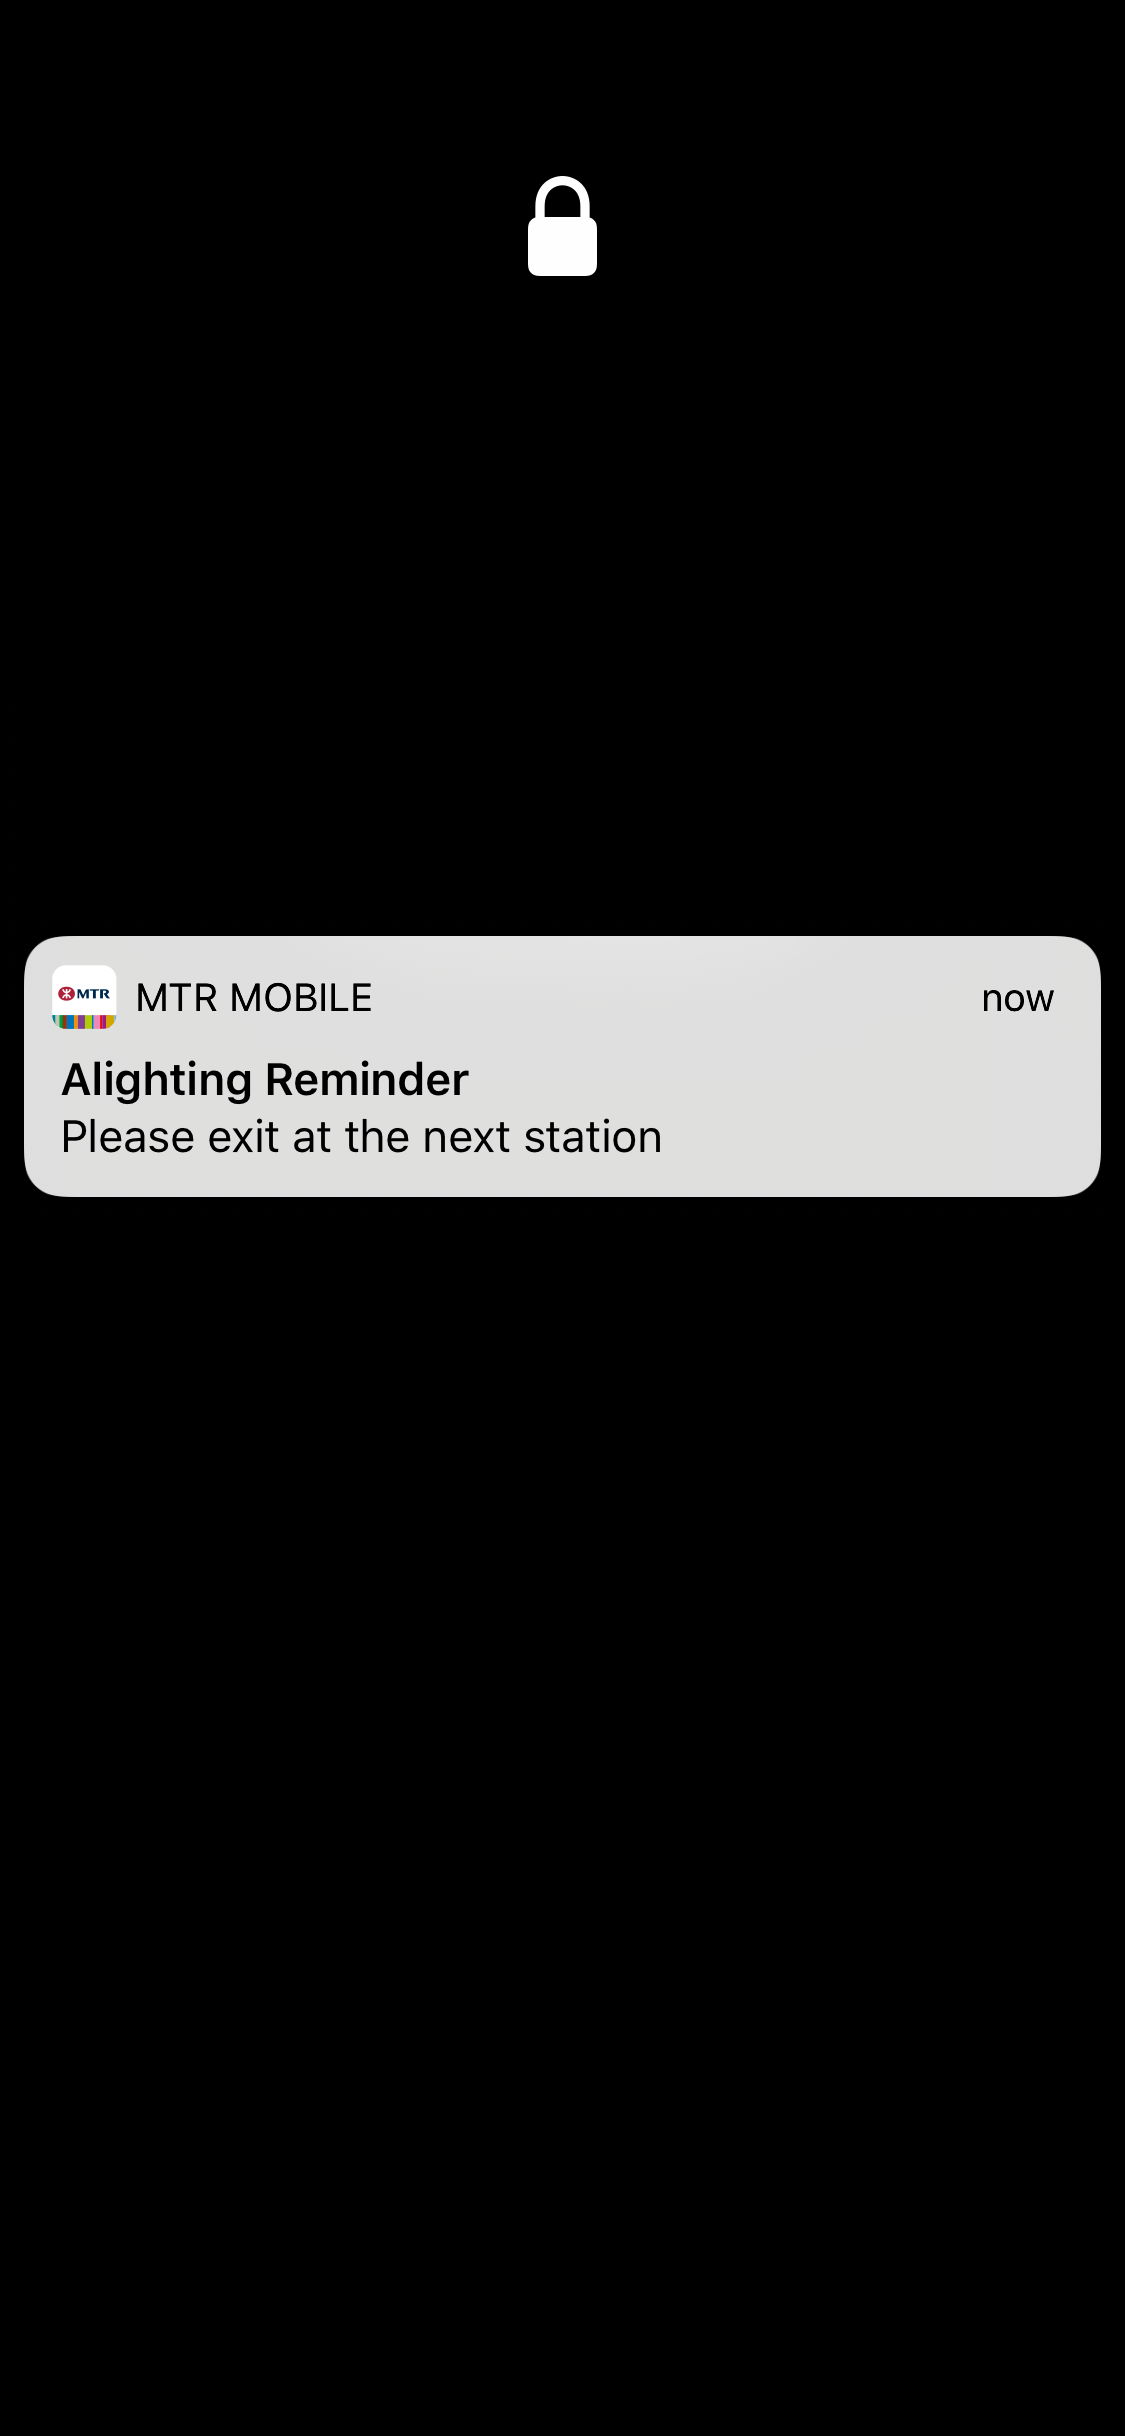 You will receive push notifications even when you are not using MTR Mobile